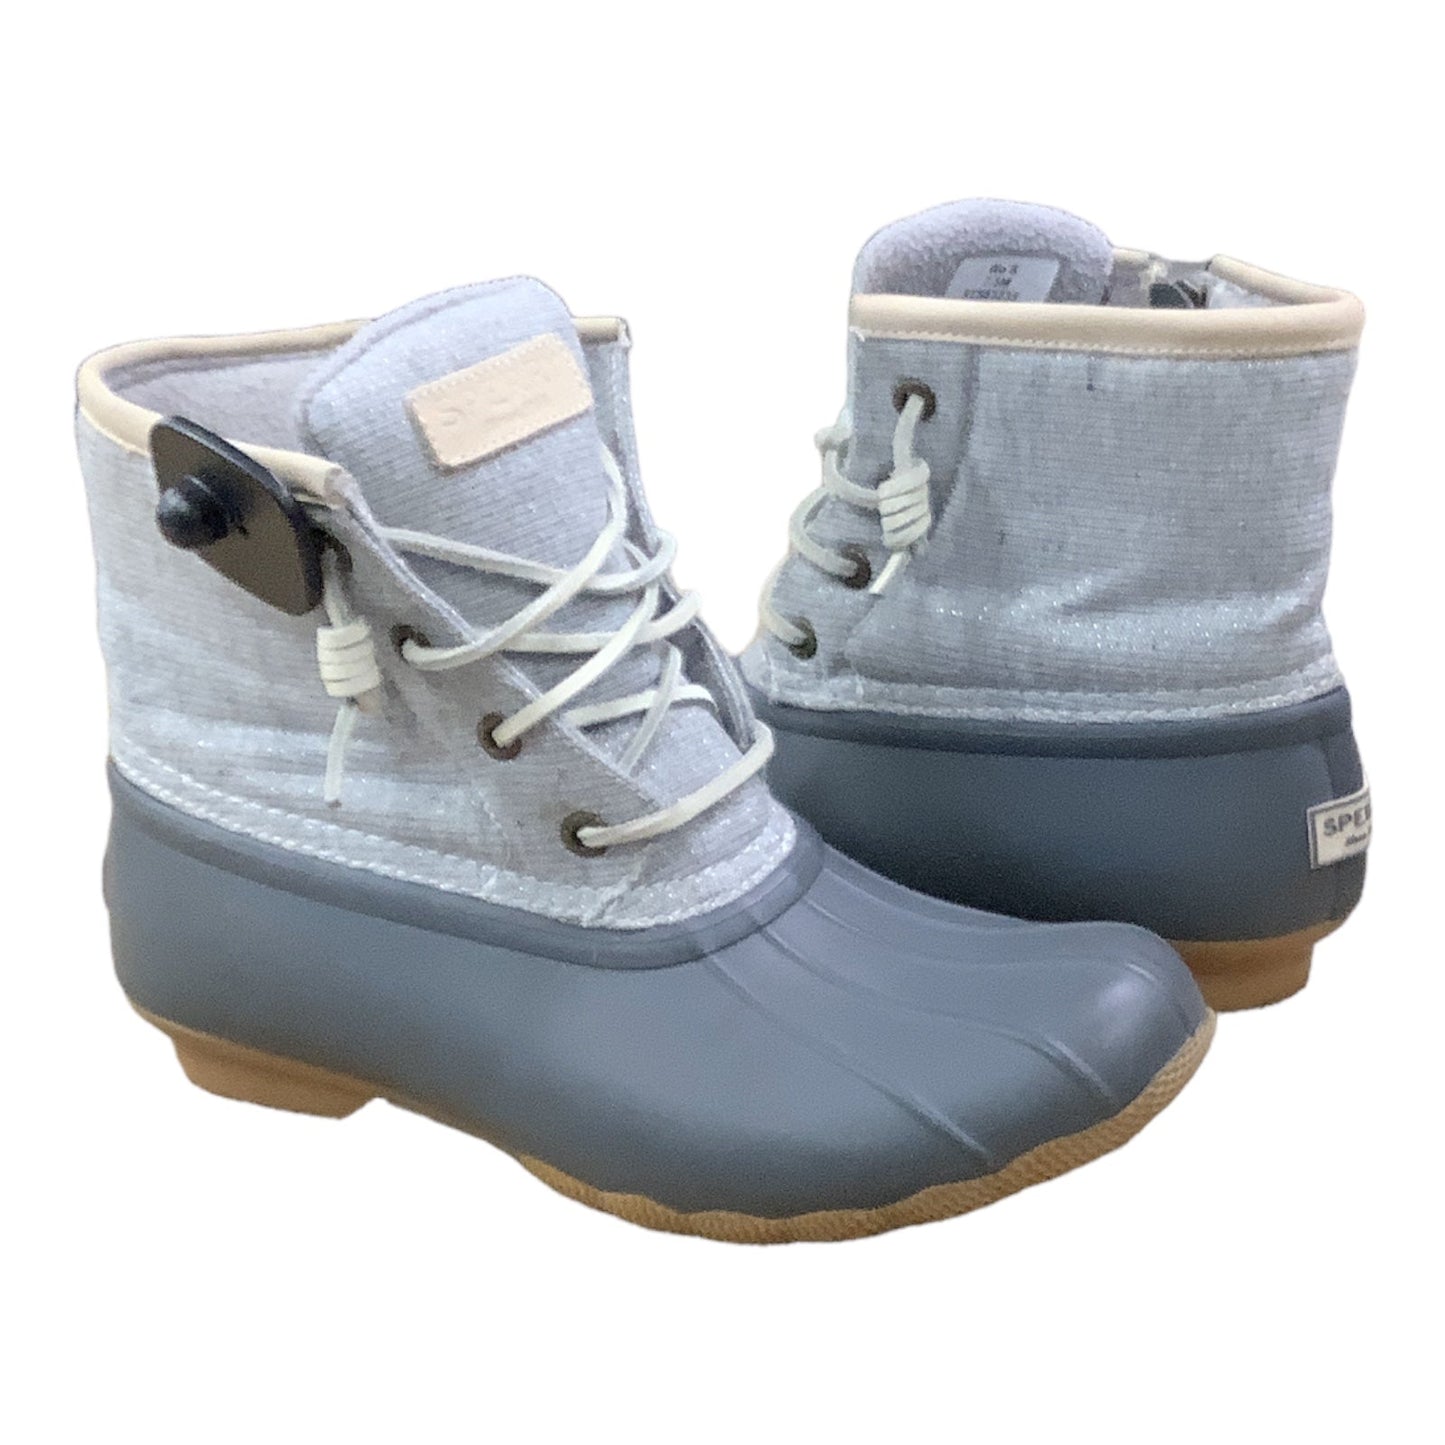 Boots Snow By Sperry  Size: 7.5